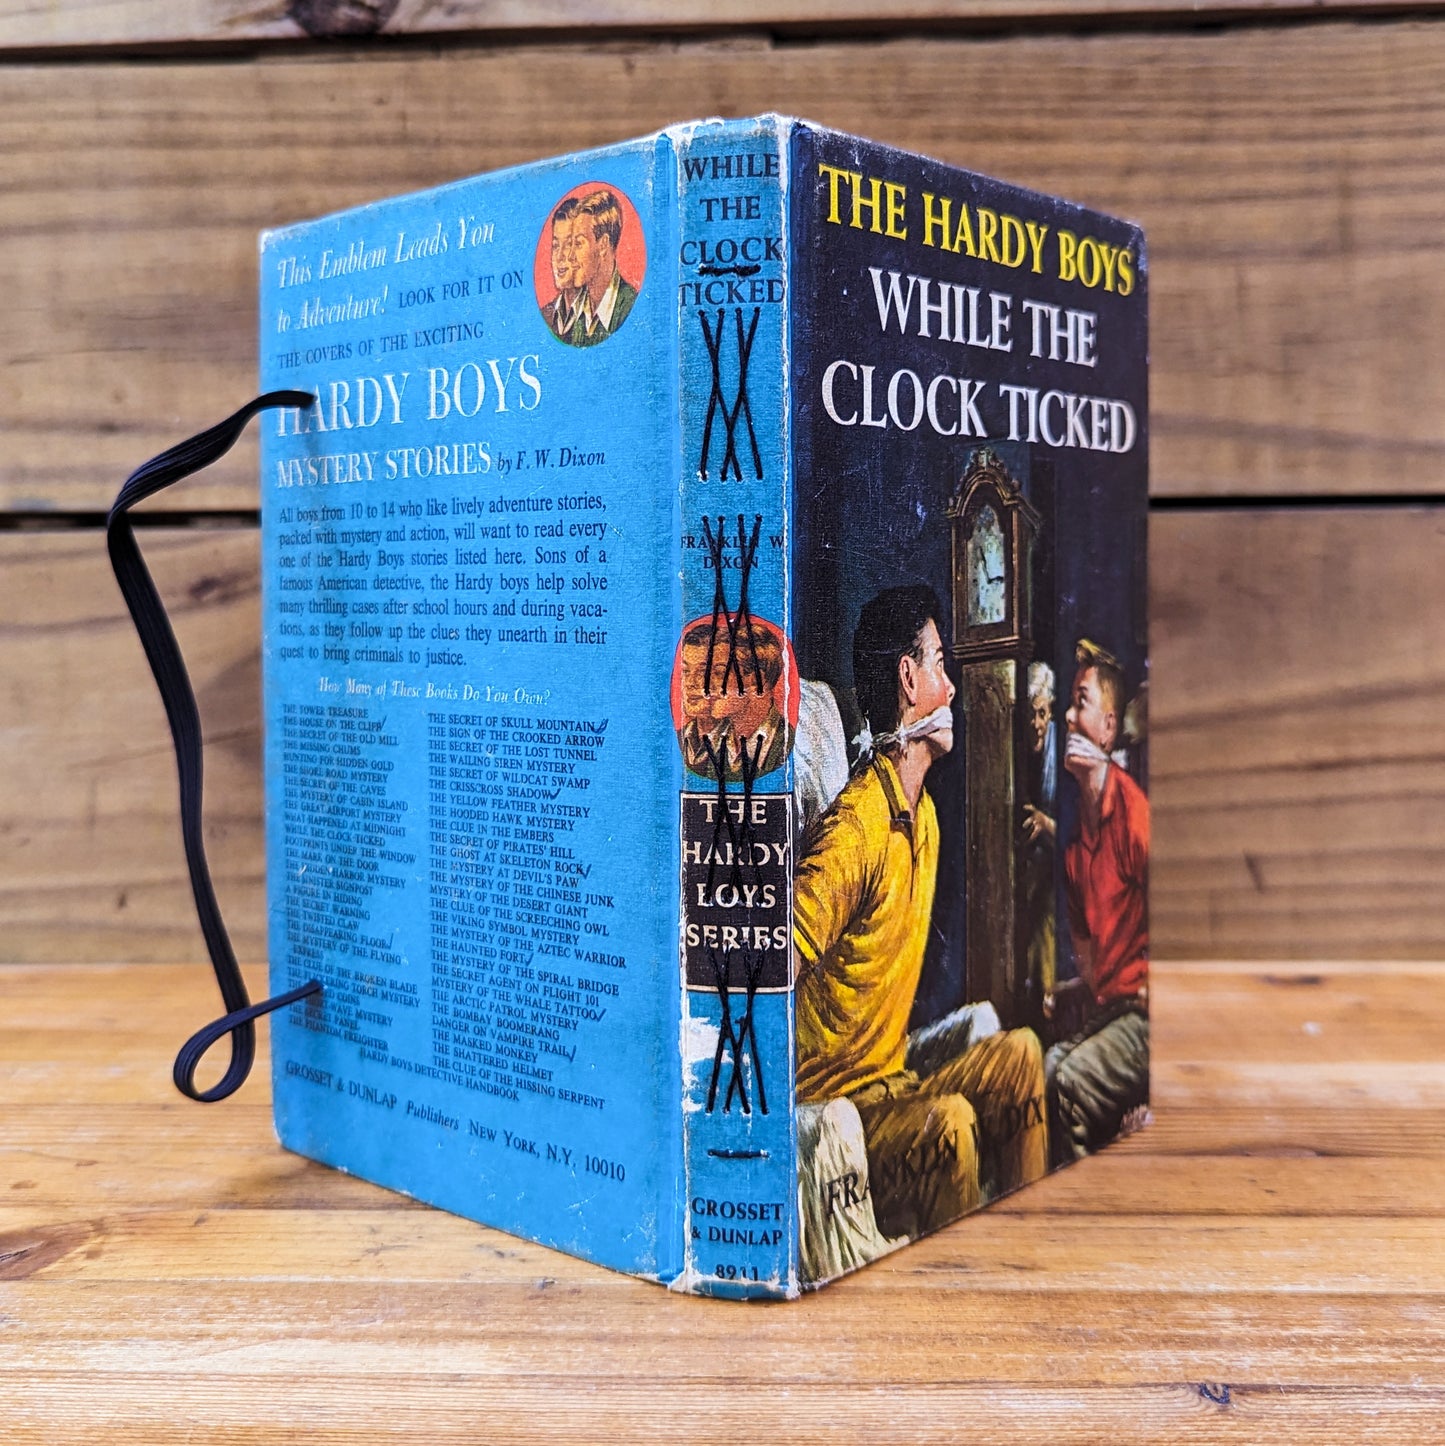 HARDY BOYS: WHILE THE CLOCK TICKED